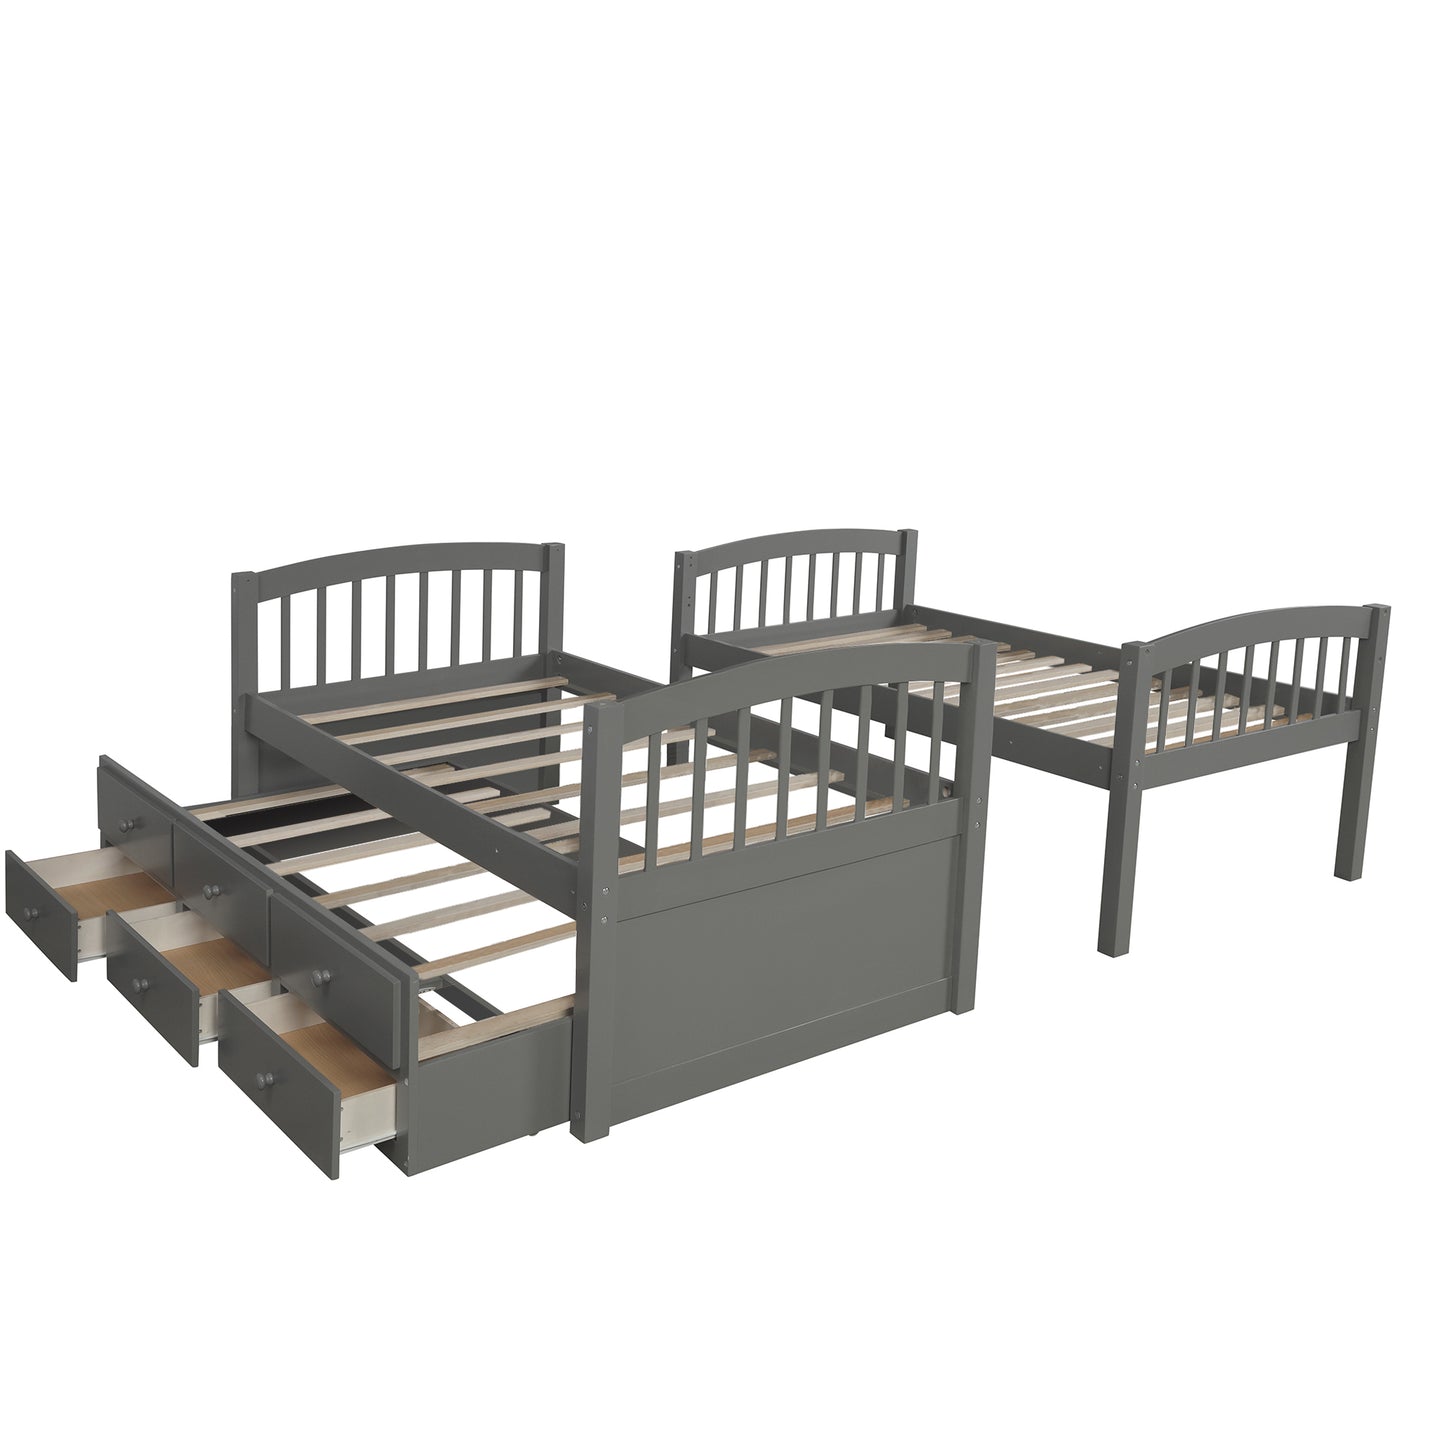 Twin Bunk Bed with Ladder, Safety Rail, Twin Trundle Bed with 3 Drawers for Bedroom, Guest Room Furniture(Gray)